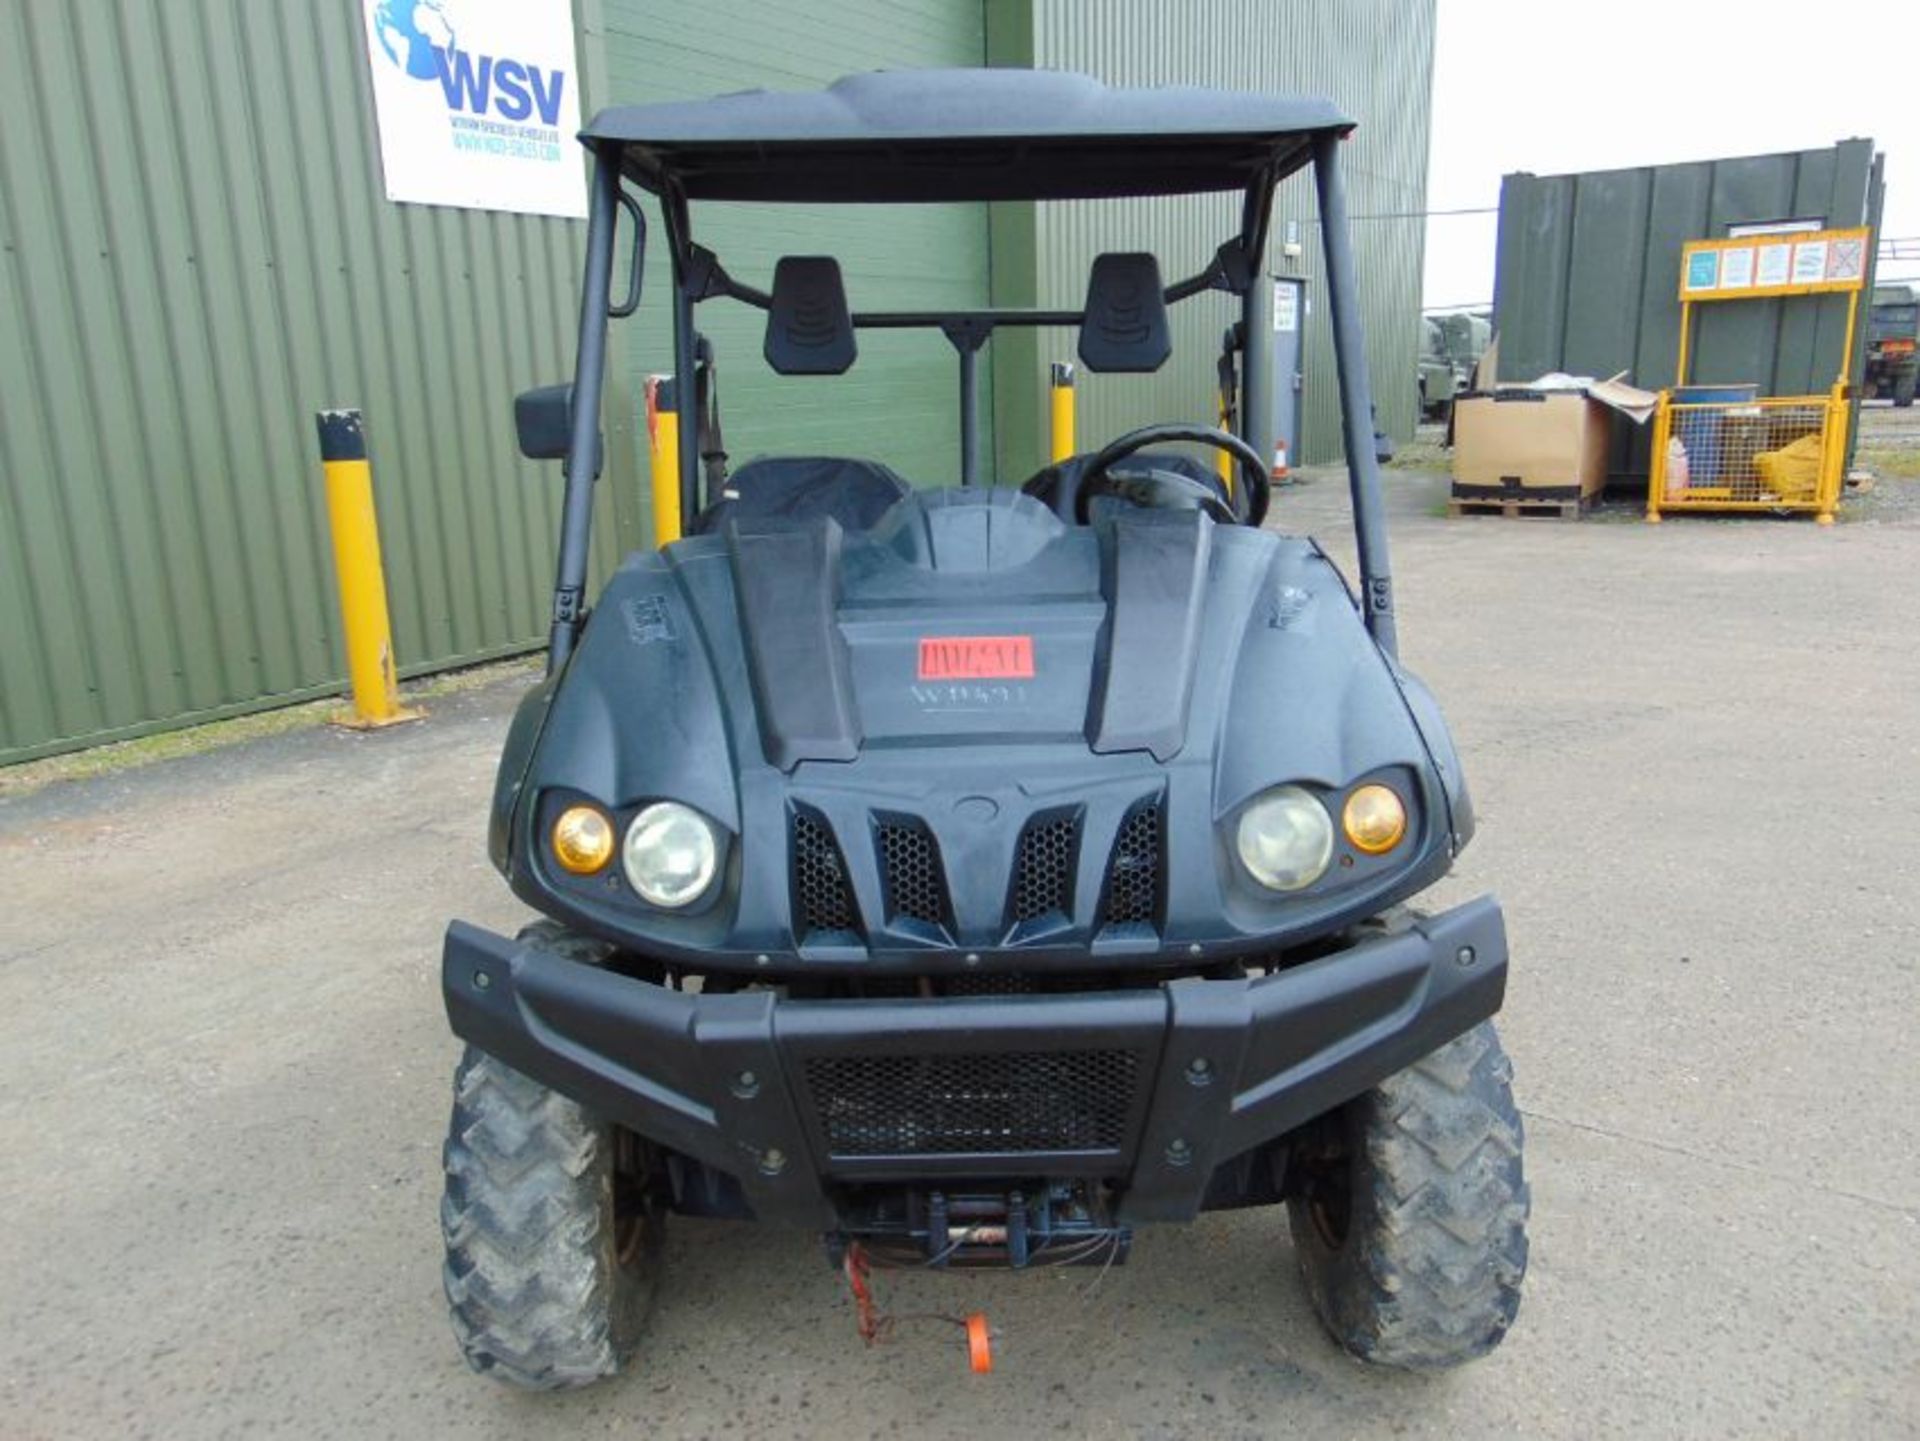 FARR 700 EFI Utility Vehicle ONLY 403 HOURS! - Image 3 of 22